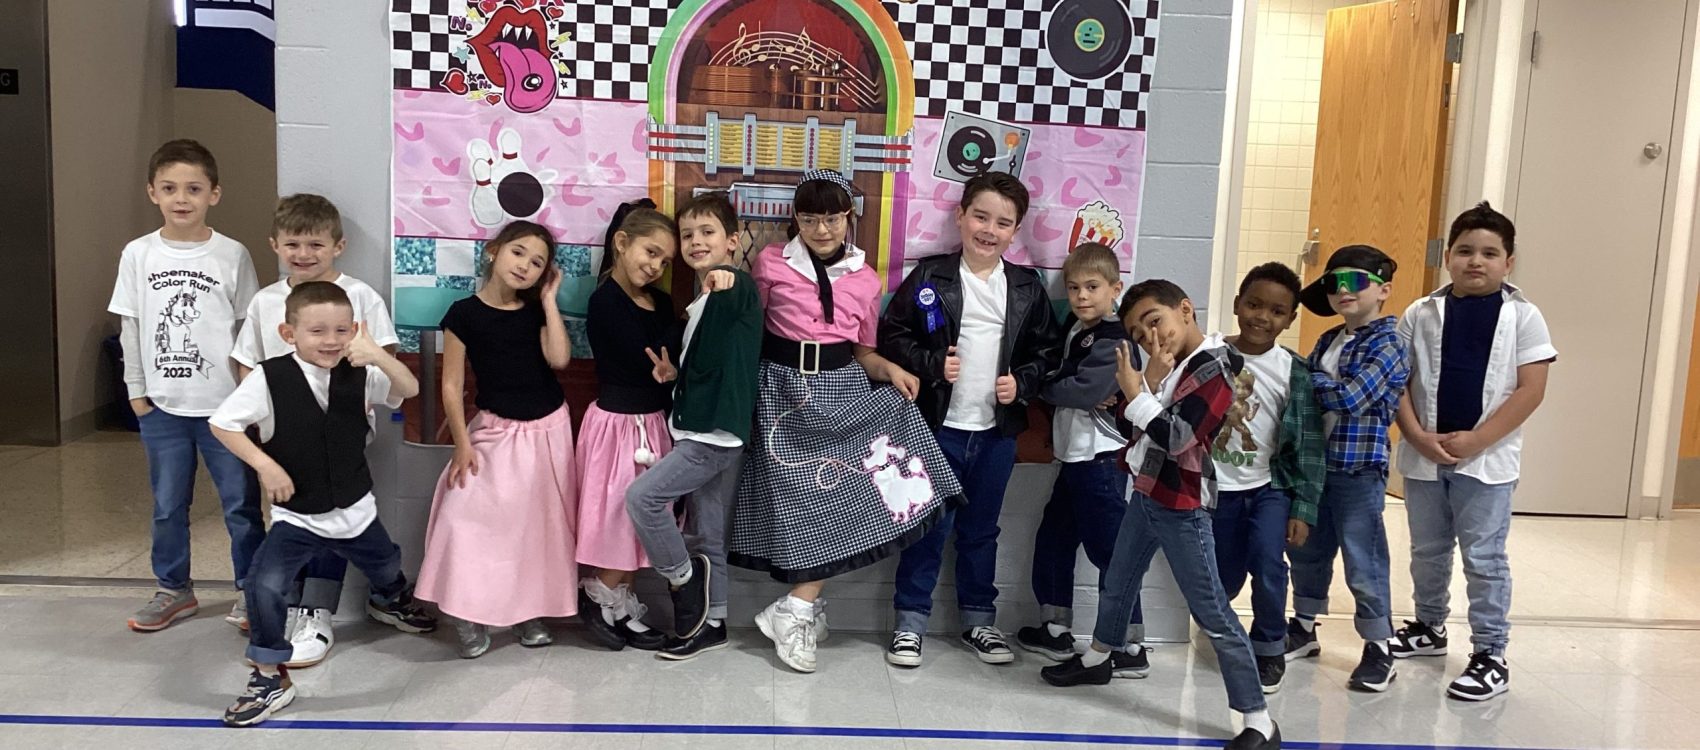 50th day of school 50's party!